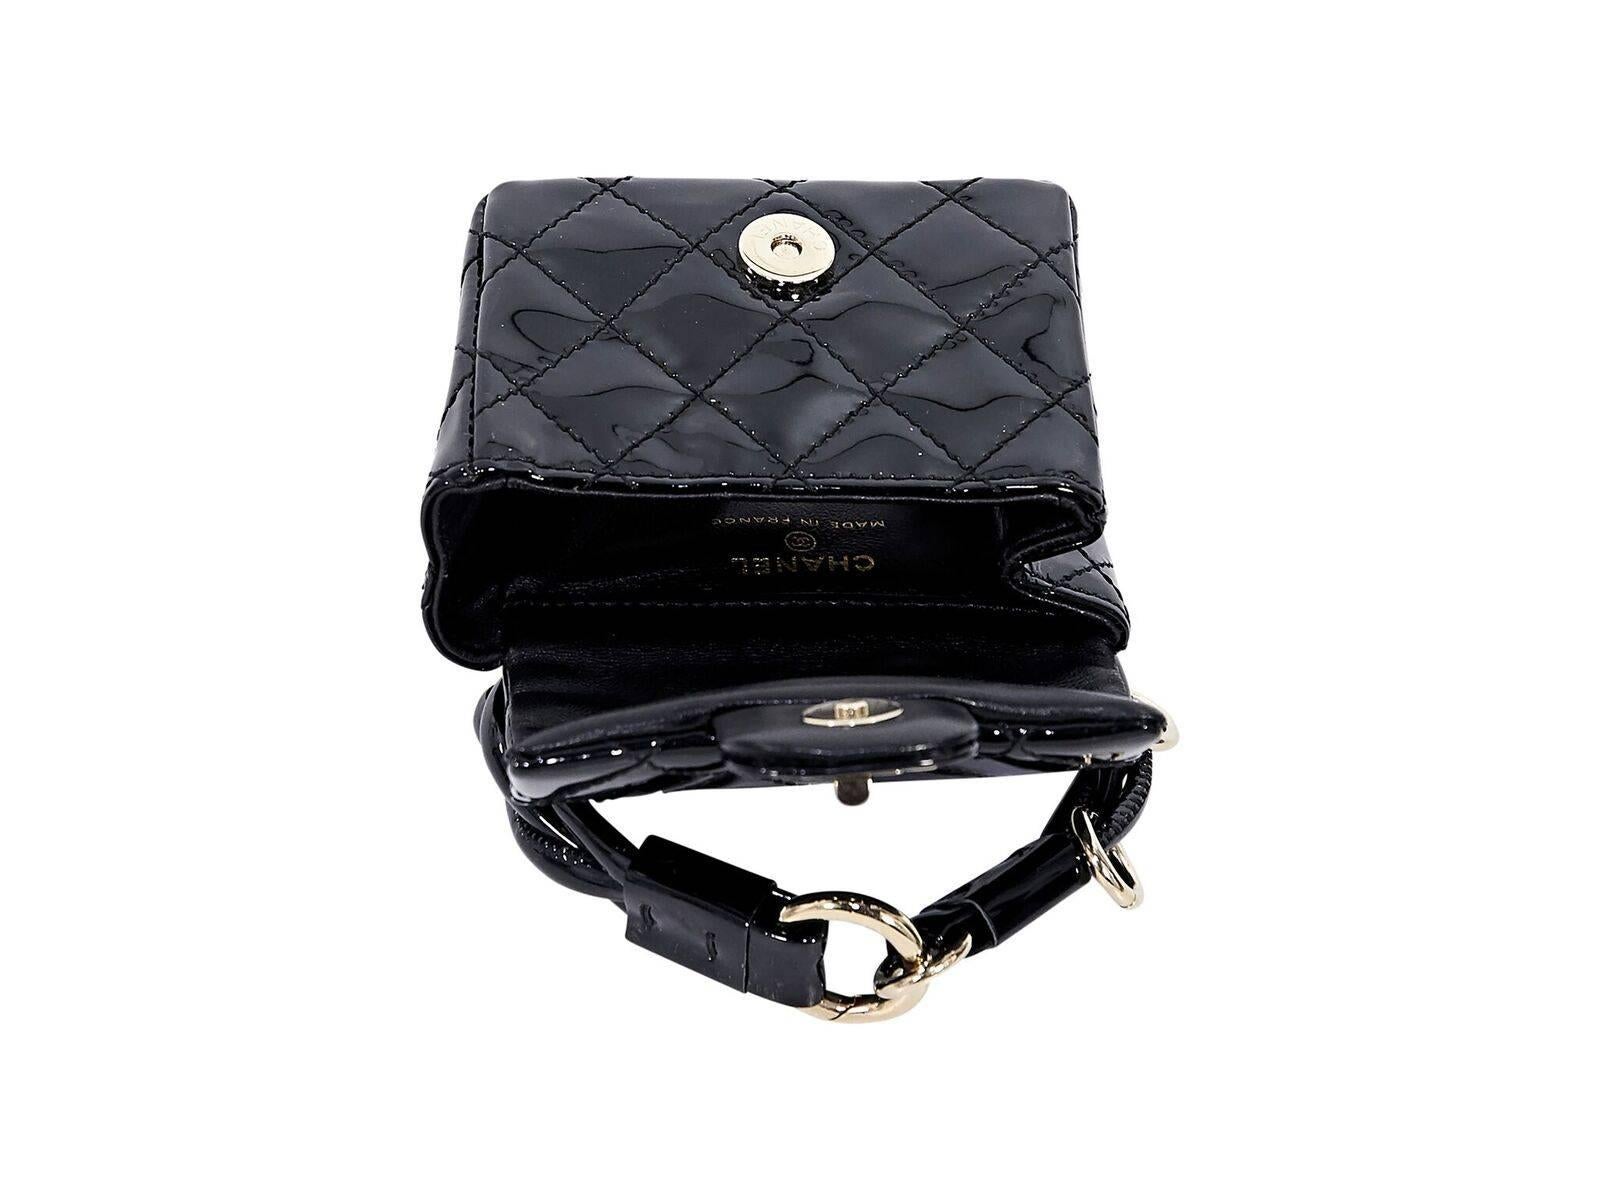 Product details:  Black quilted patent leather ankle bag by Chanel.  Ankle strap with clasp closure.  Front flap with magnetic snap closure.  Faux twist-lock closure.  Lined interior.  Goldtone hardware.  4